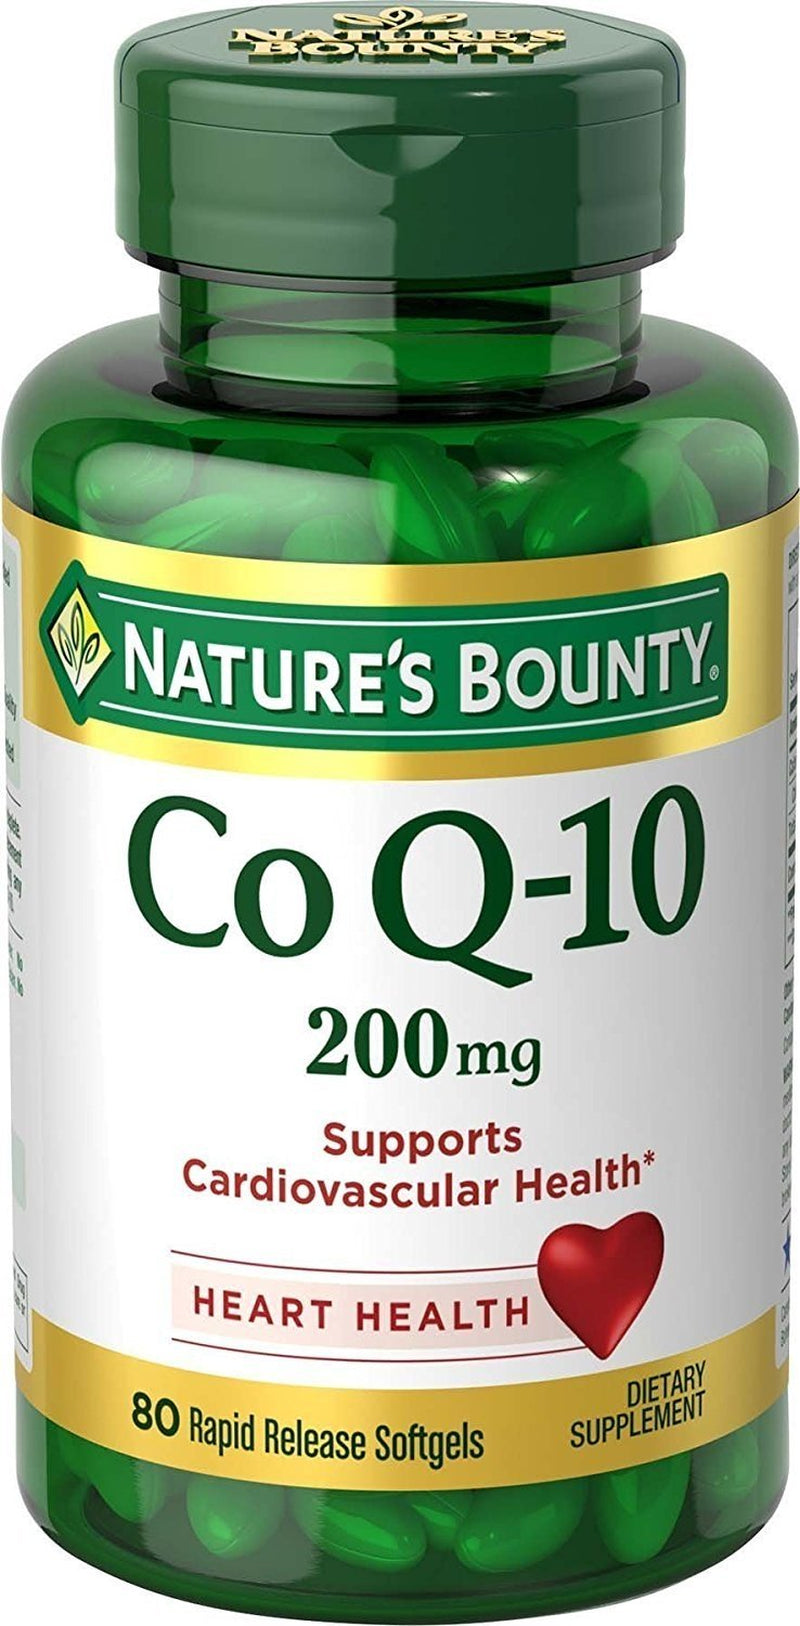 Nature'S Bounty Co Q-12 200Mg Supports Cardiovascular Health, 80 Ct, 3 Pack